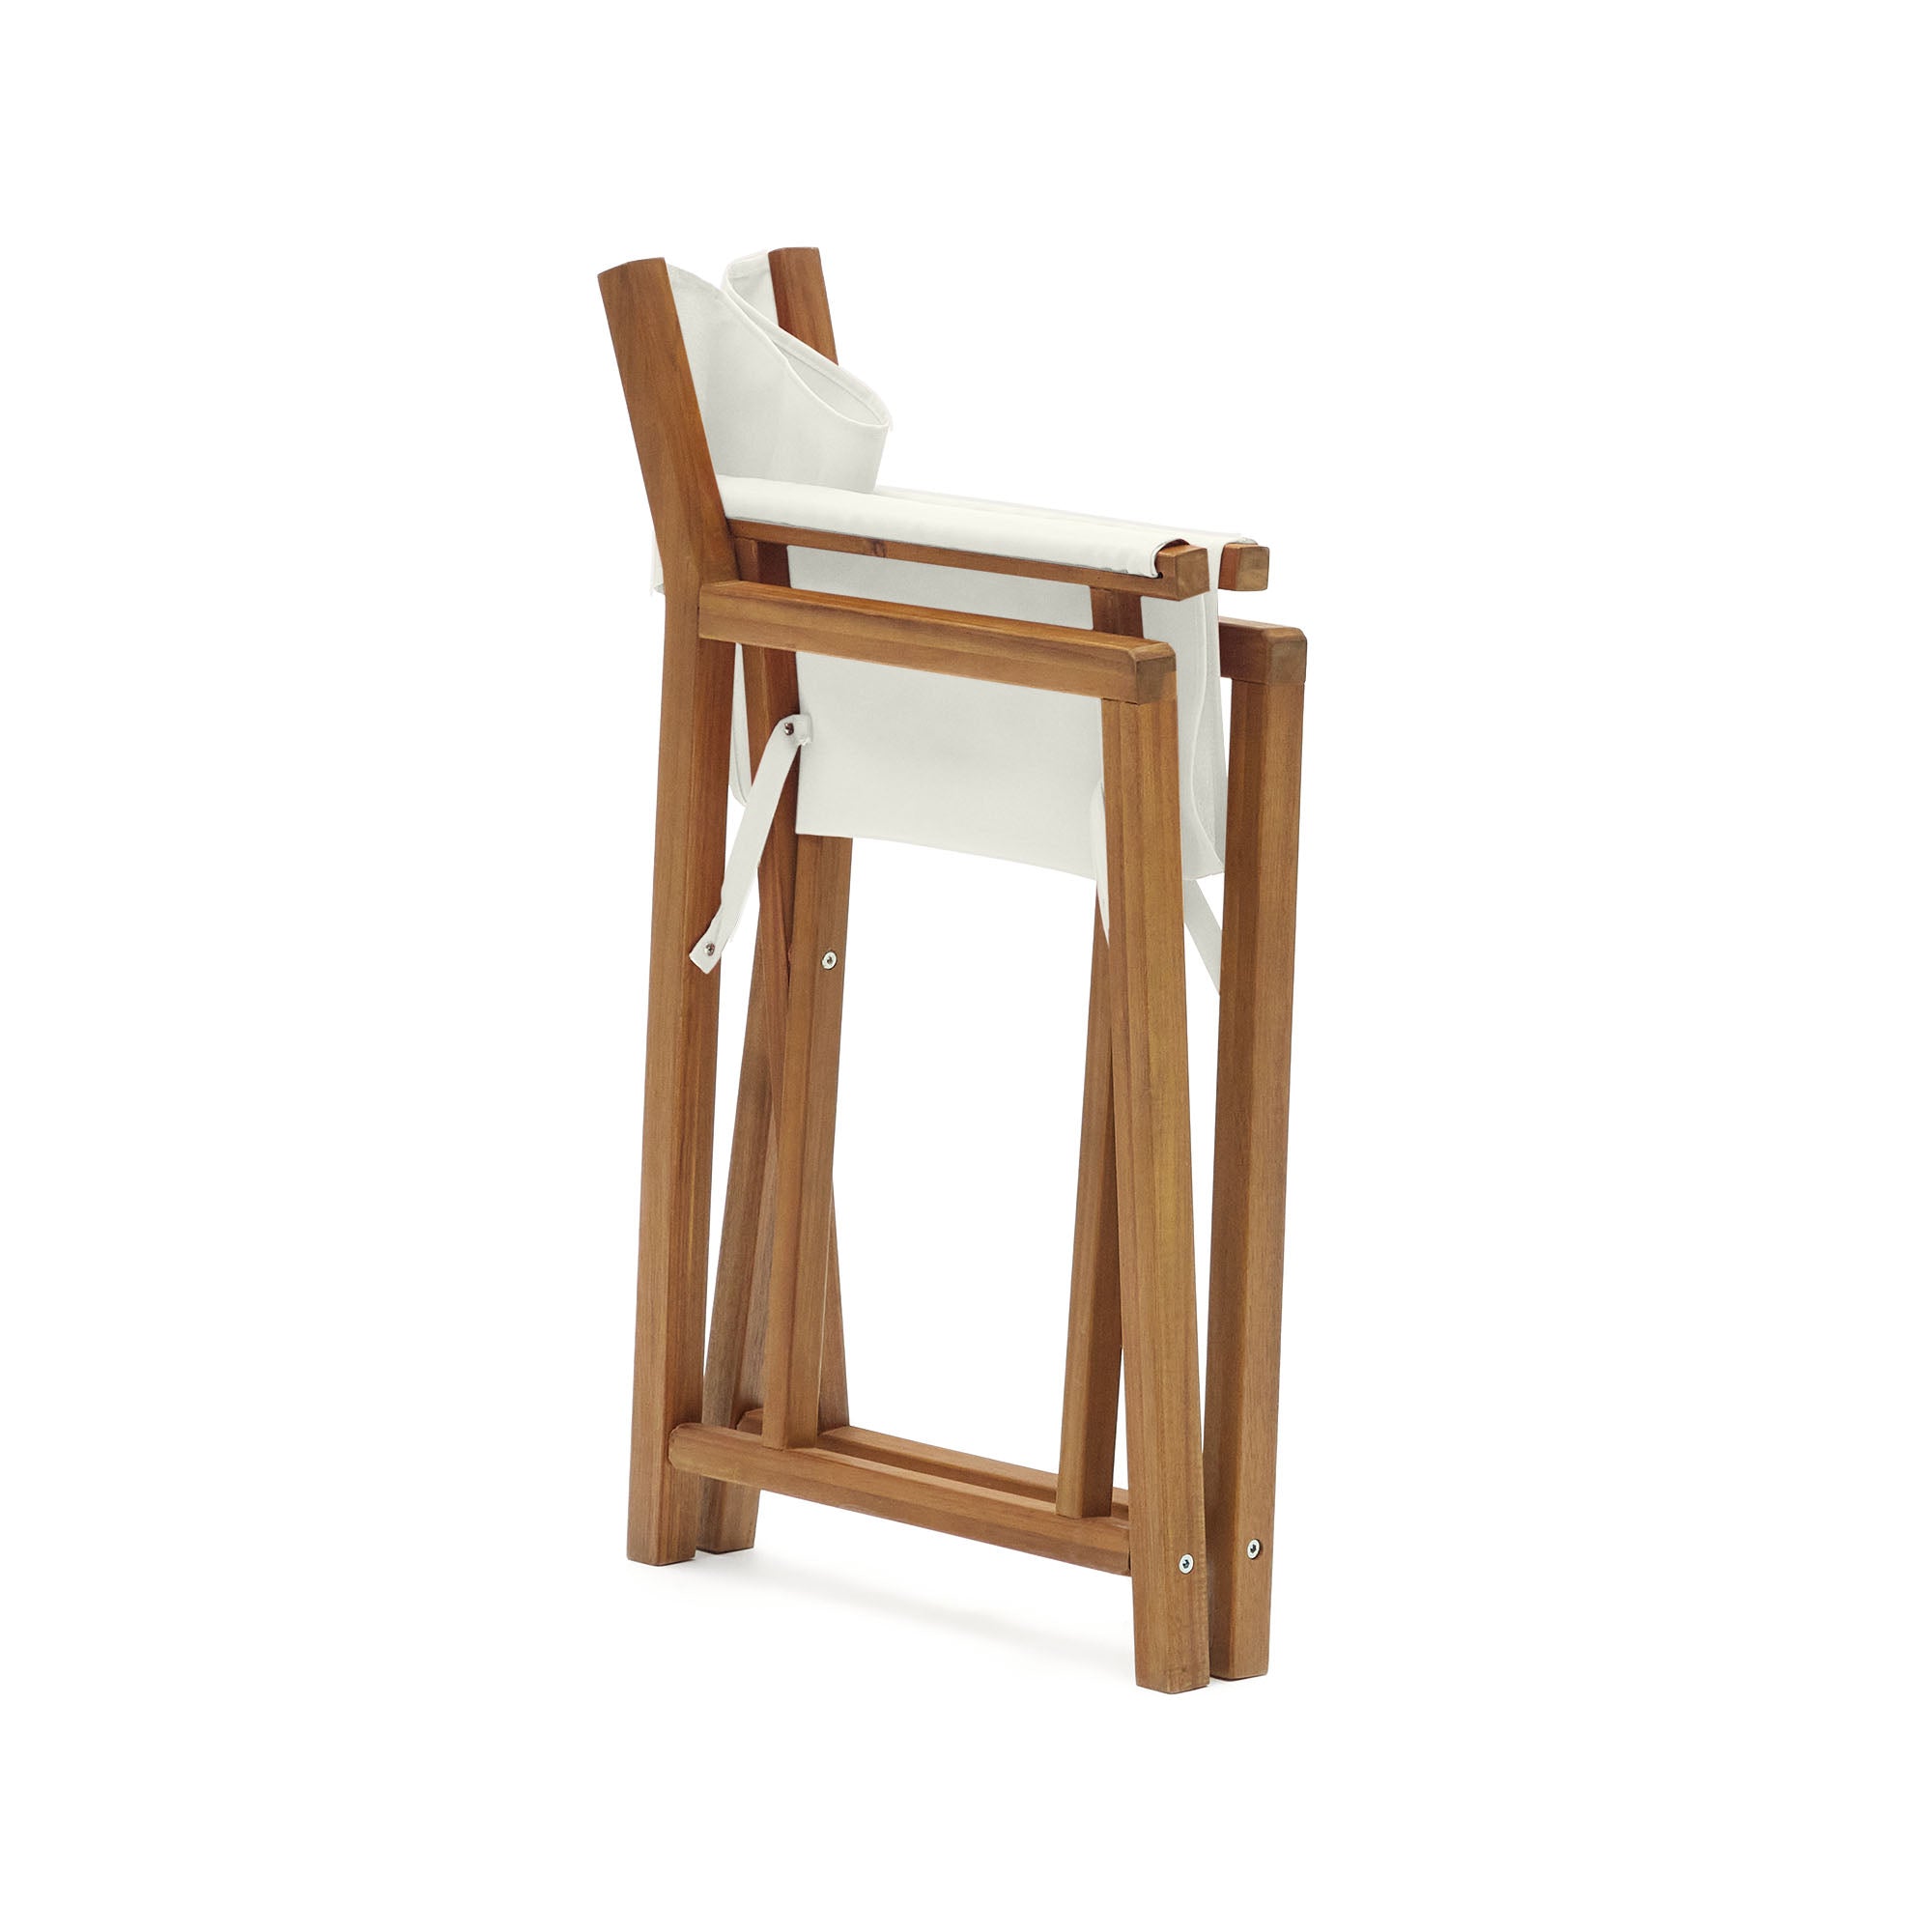 Thianna folding outdoor chair in beige with solid acacia wood FSC 100%